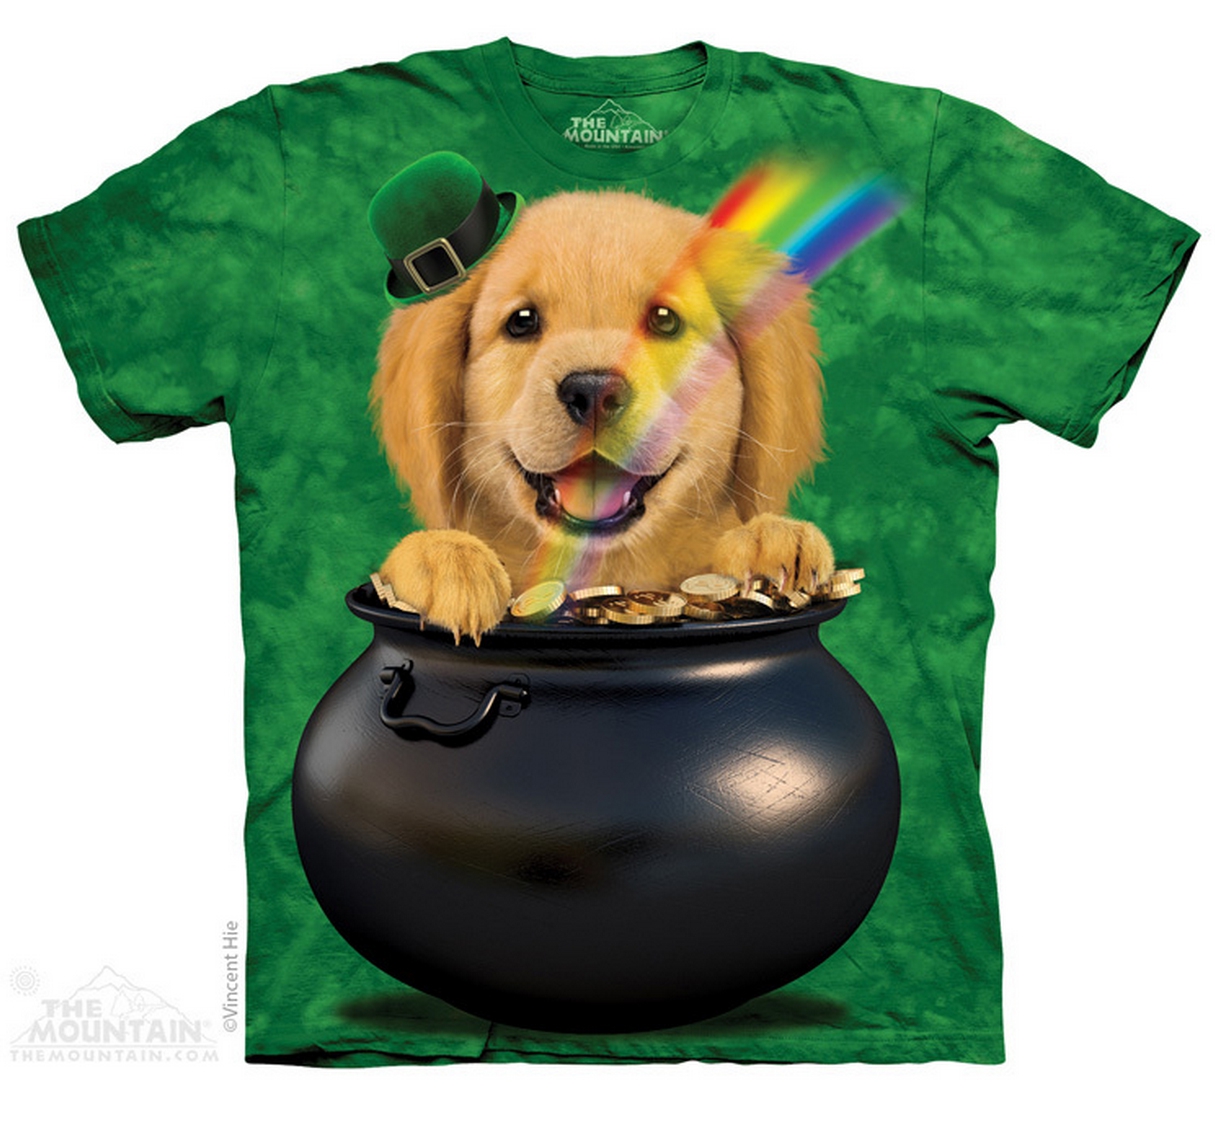 The Mountain Pot of Gold